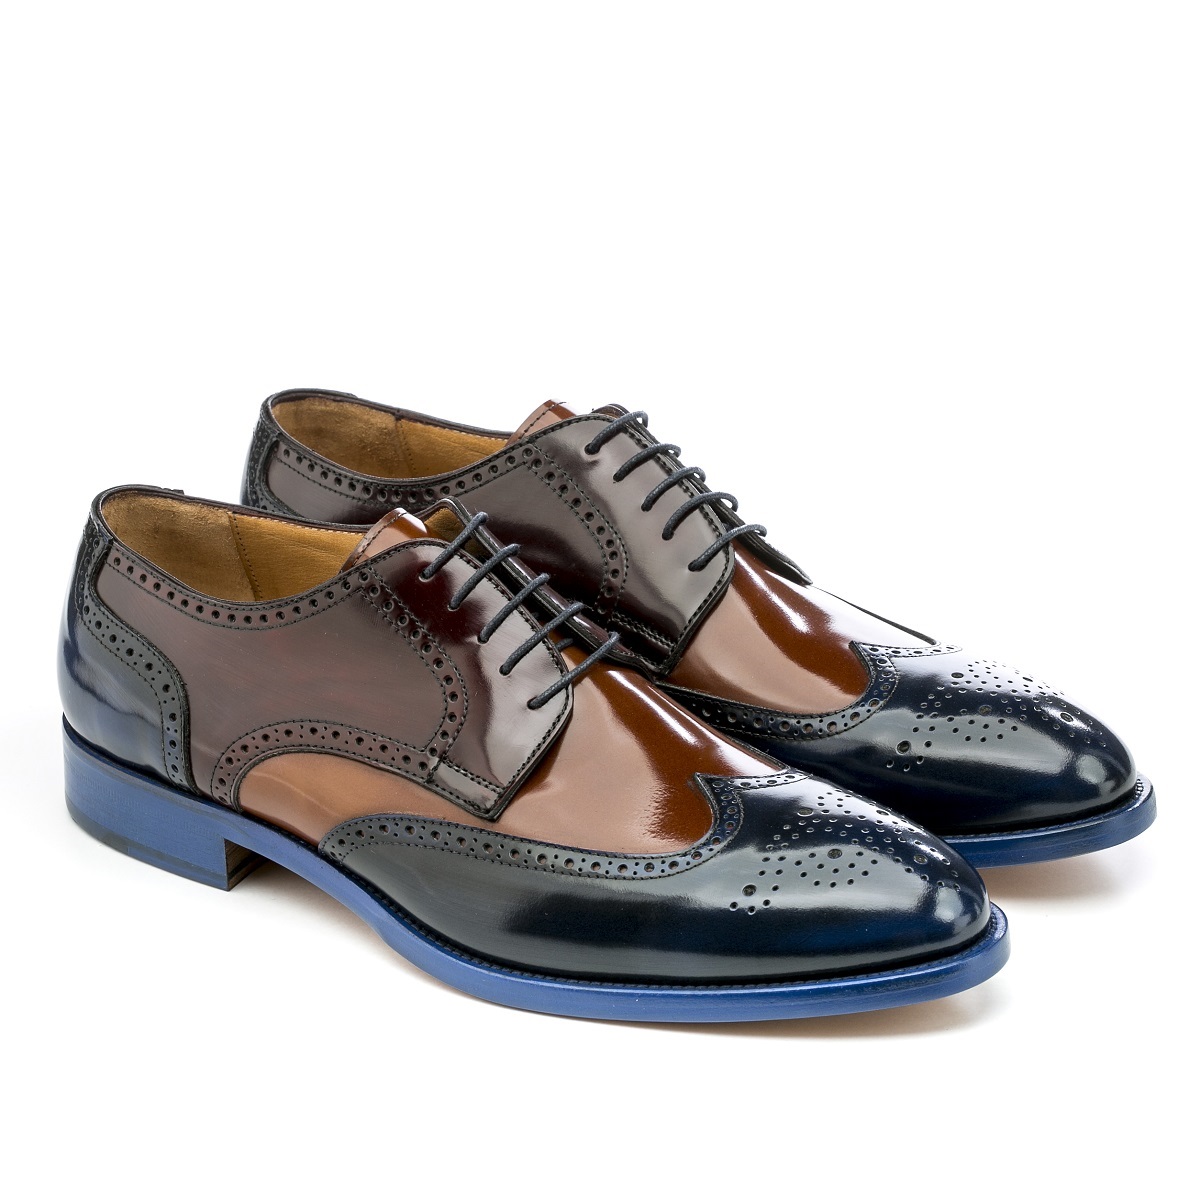 Men's Eye Derby Brogue Polished Leather Lace-Up Shoes 5453 M 39 - Navy ...